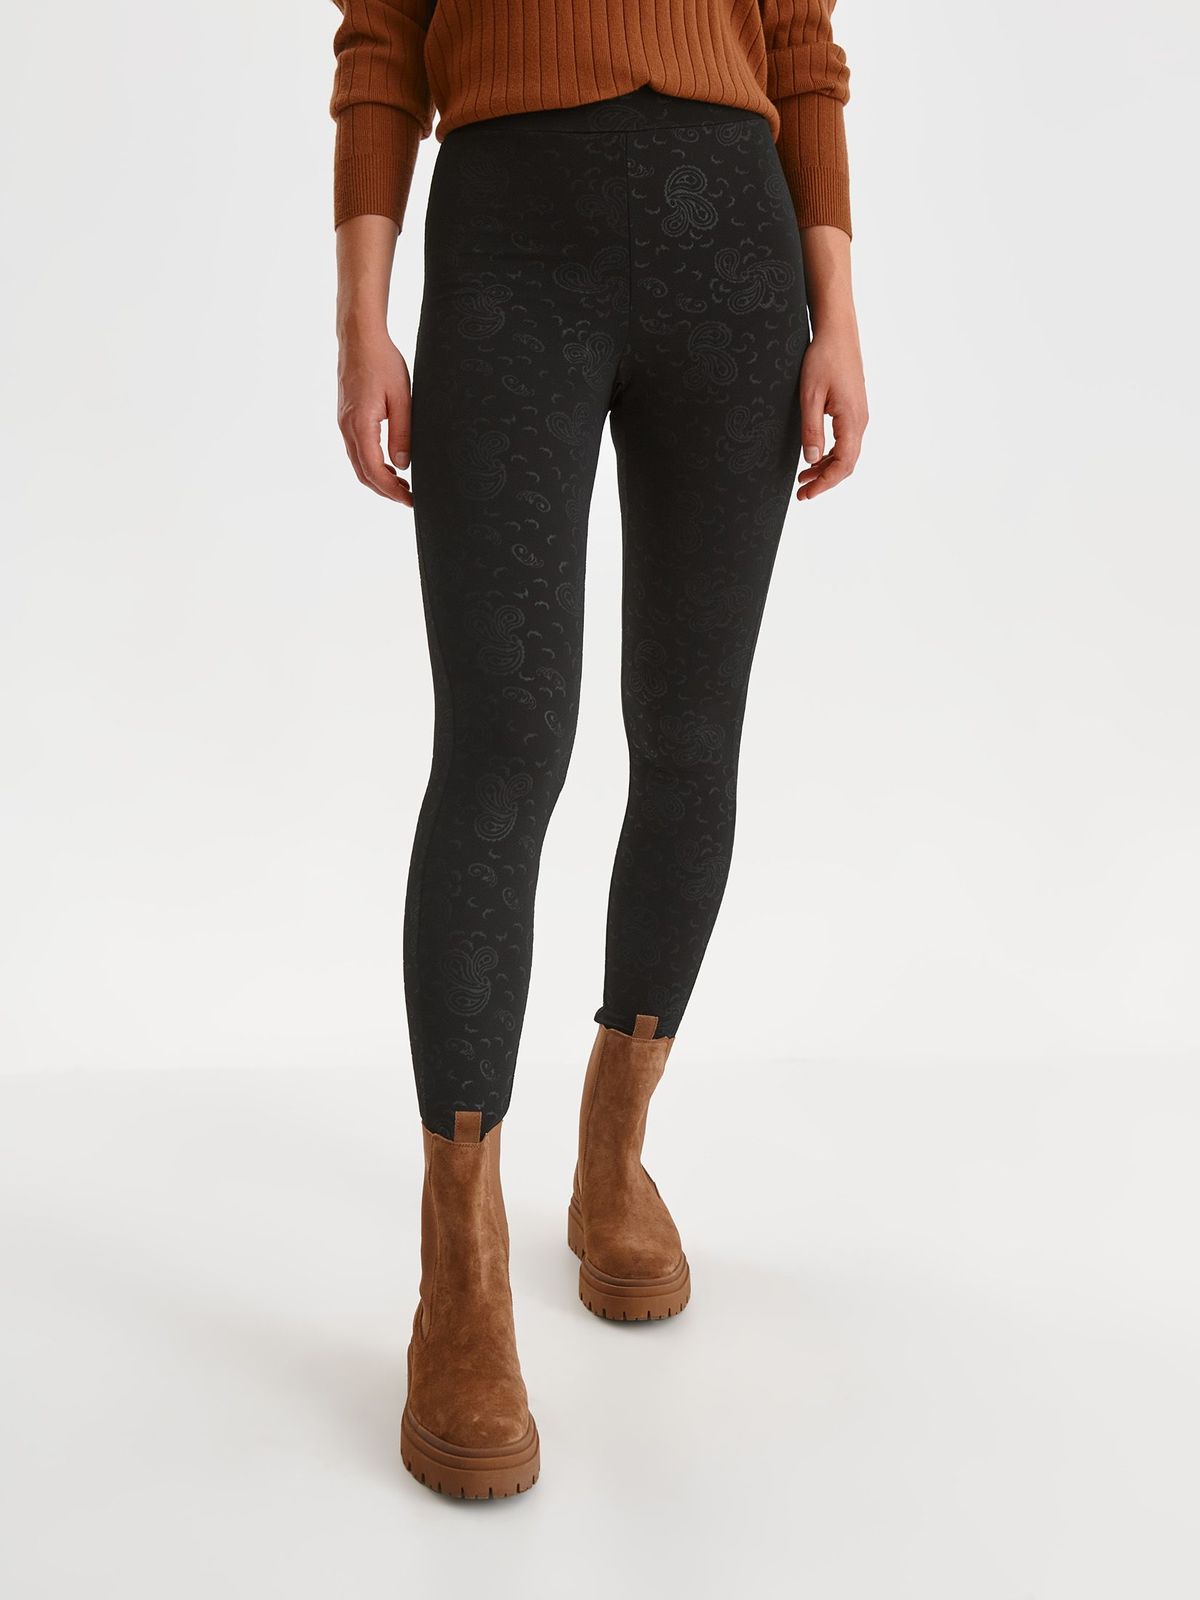 Black tights high waisted textured crepe 2 - StarShinerS.com